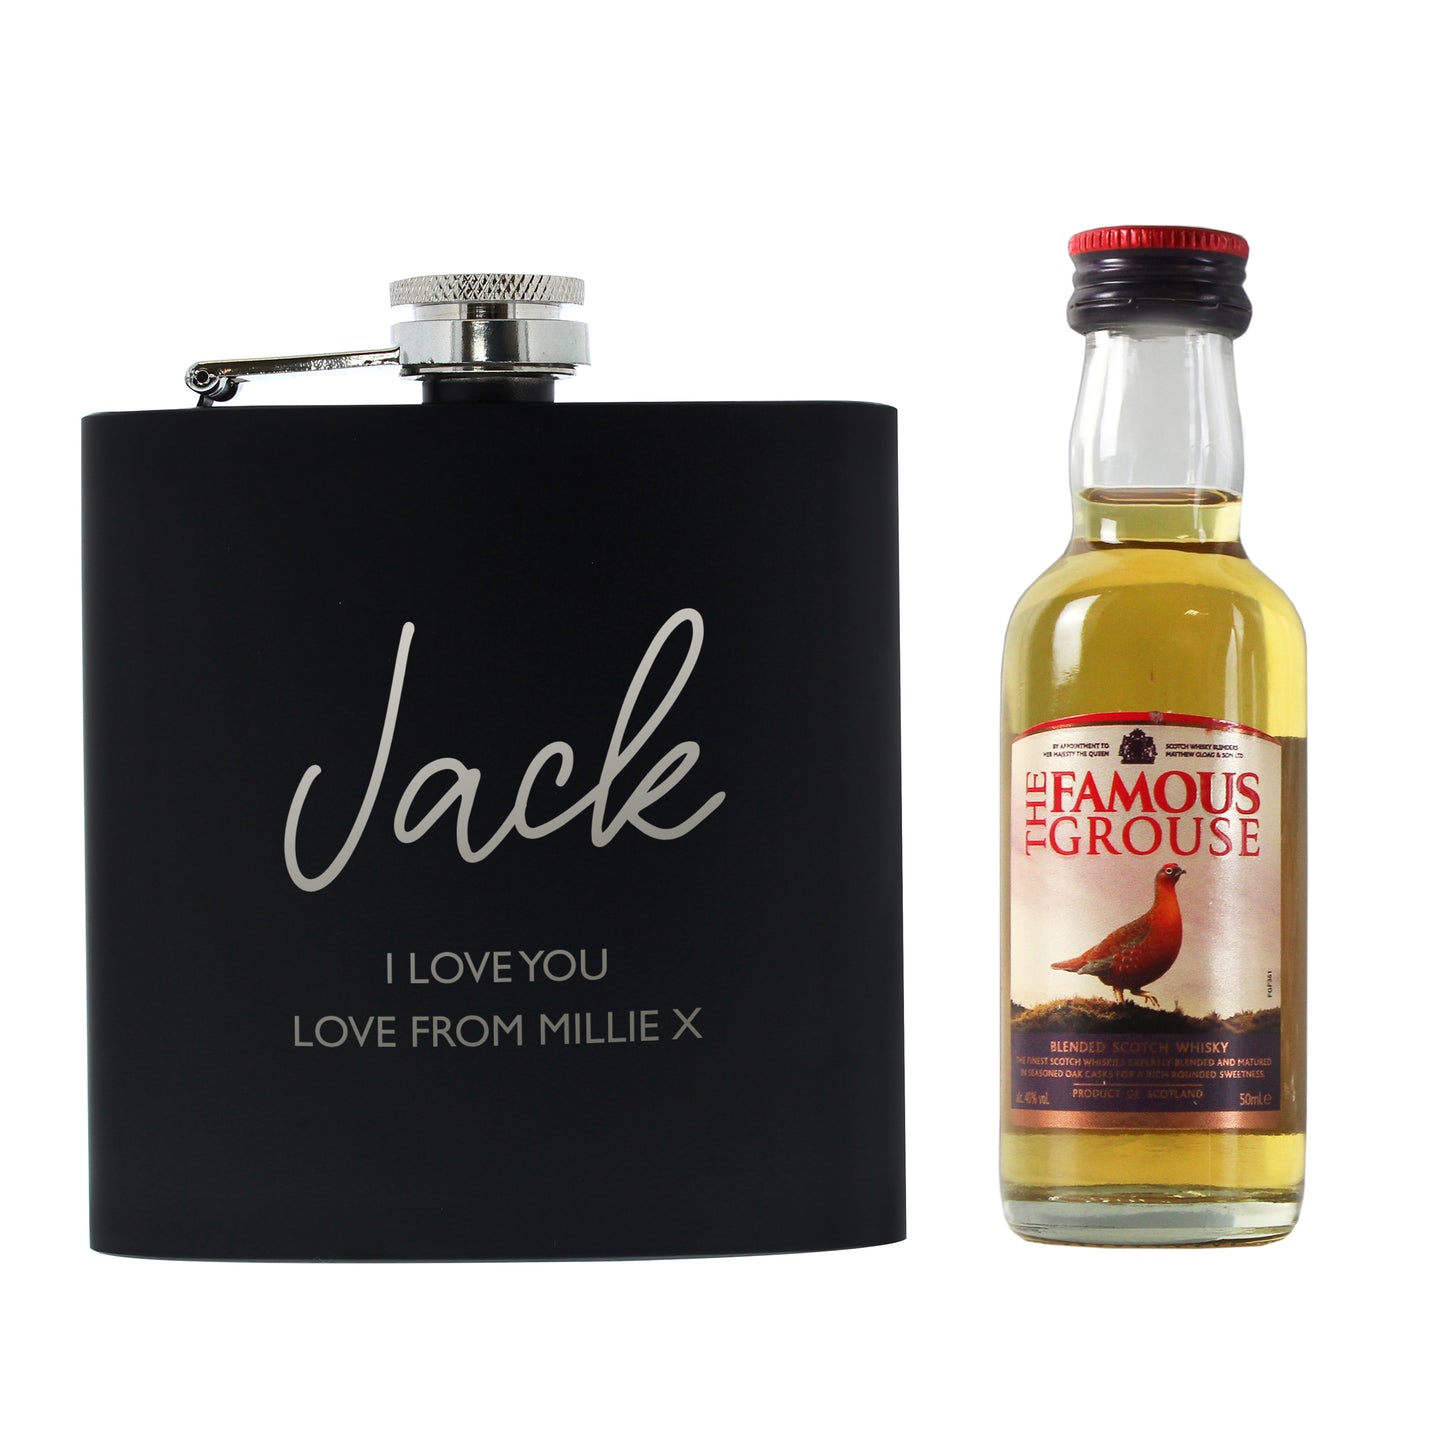 Personalised Hipflask and Miniature Whiskey